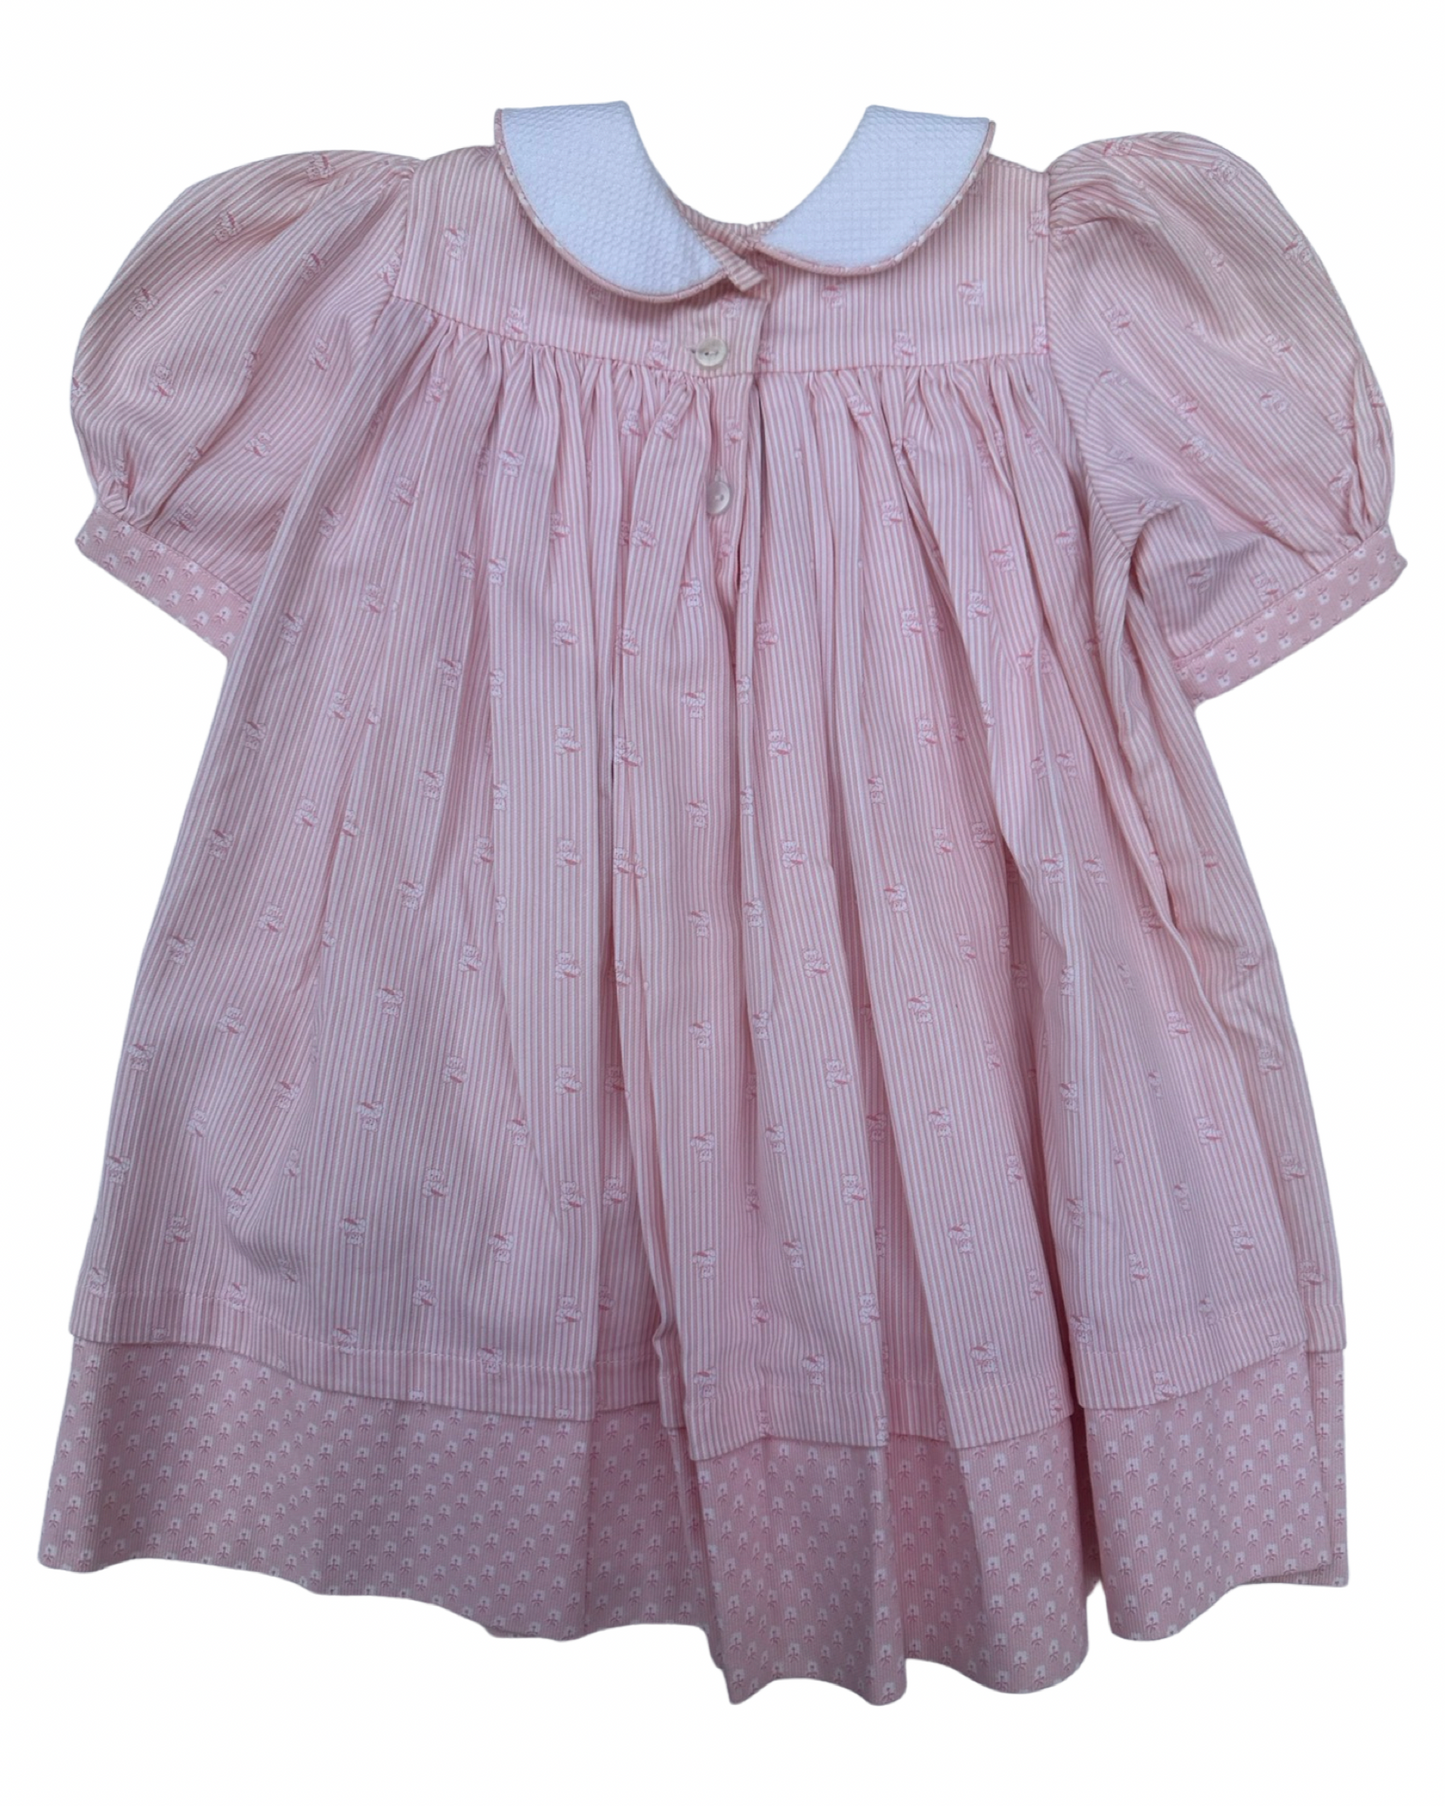 Handmade smocked cotton dress in pale pink (size 2-3yrs)